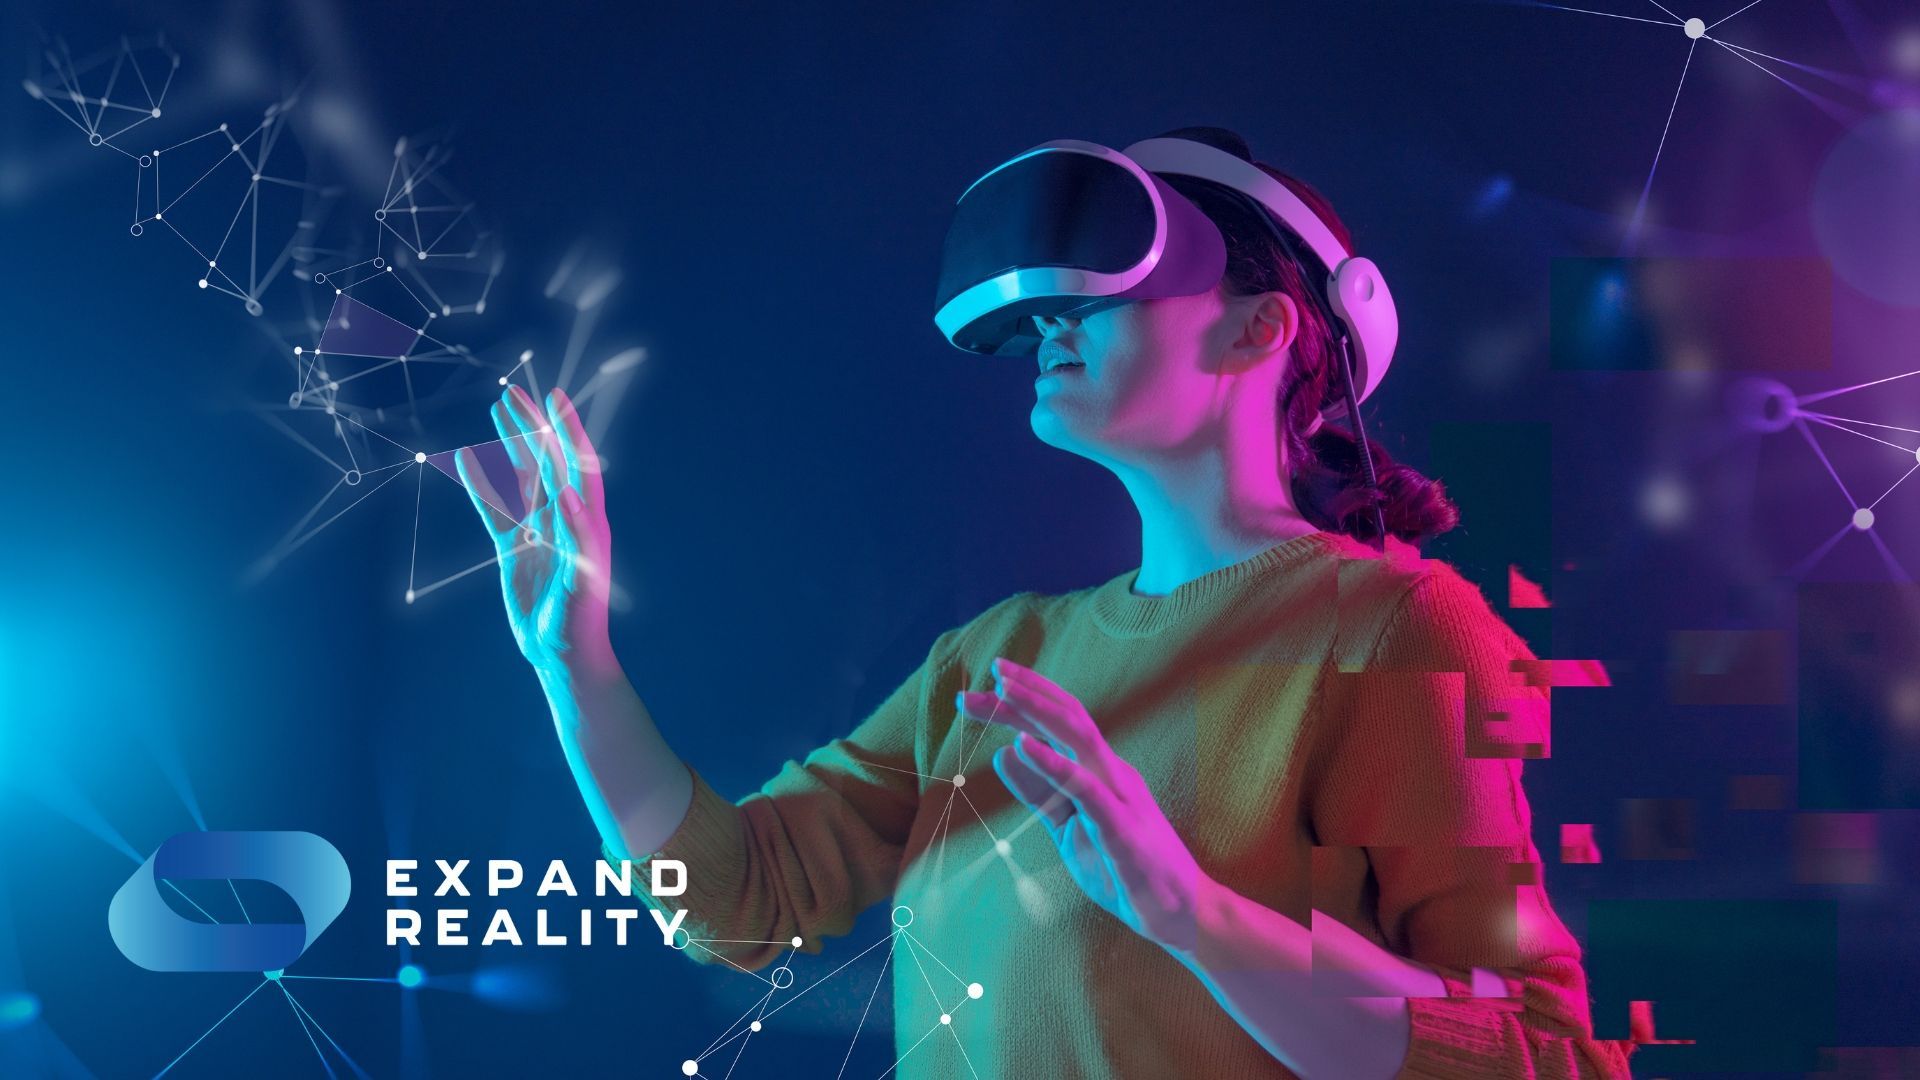 There's so much happening in the world of extended reality. We've put together a shortlist of our favourite recent XR projects that will blow your mind.